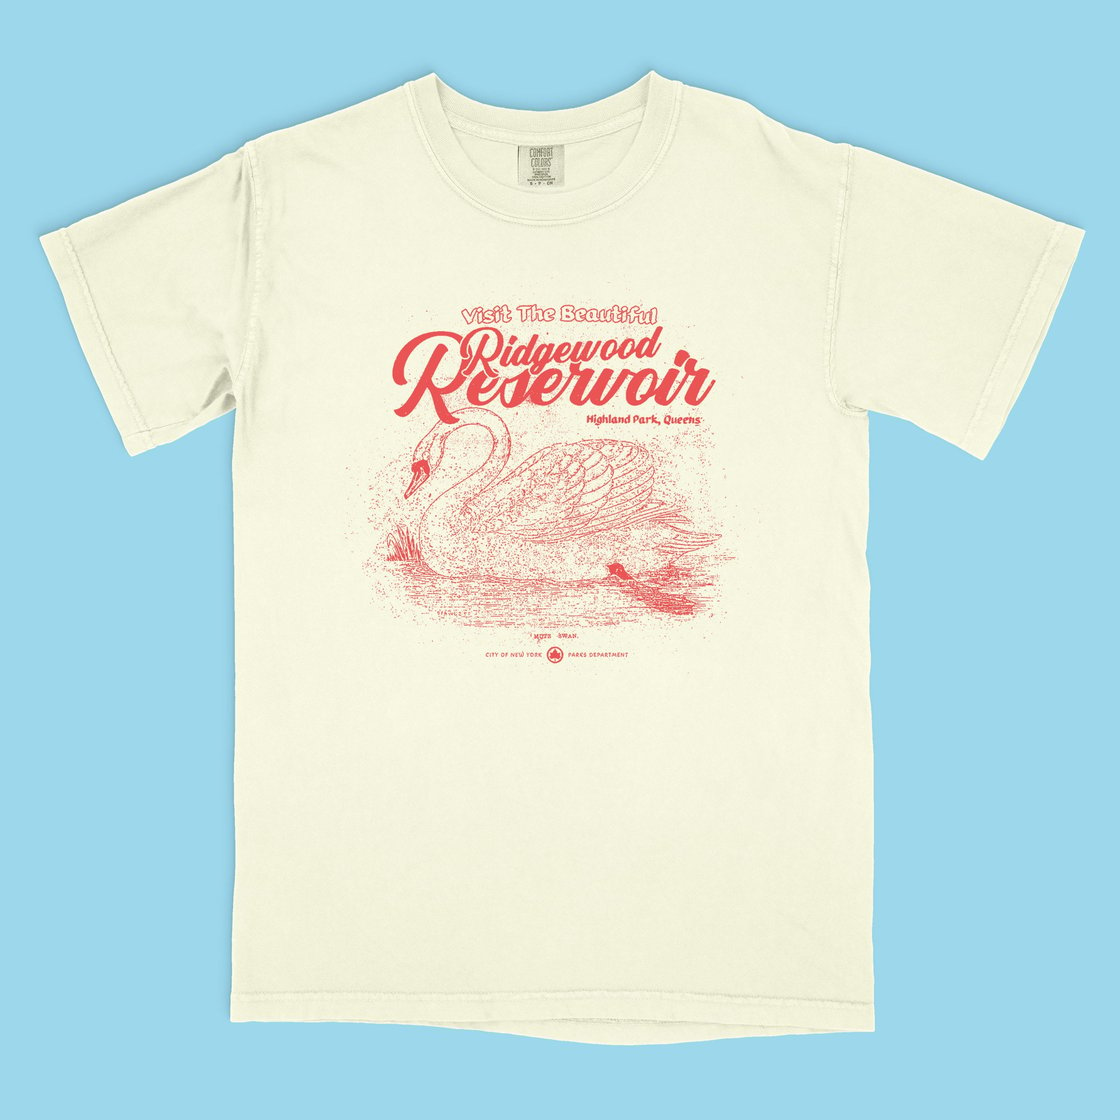 Image of Ridgewood Reservoir Queens, NY Shirt - Comfort Colors 1717 Highland/Forest Park